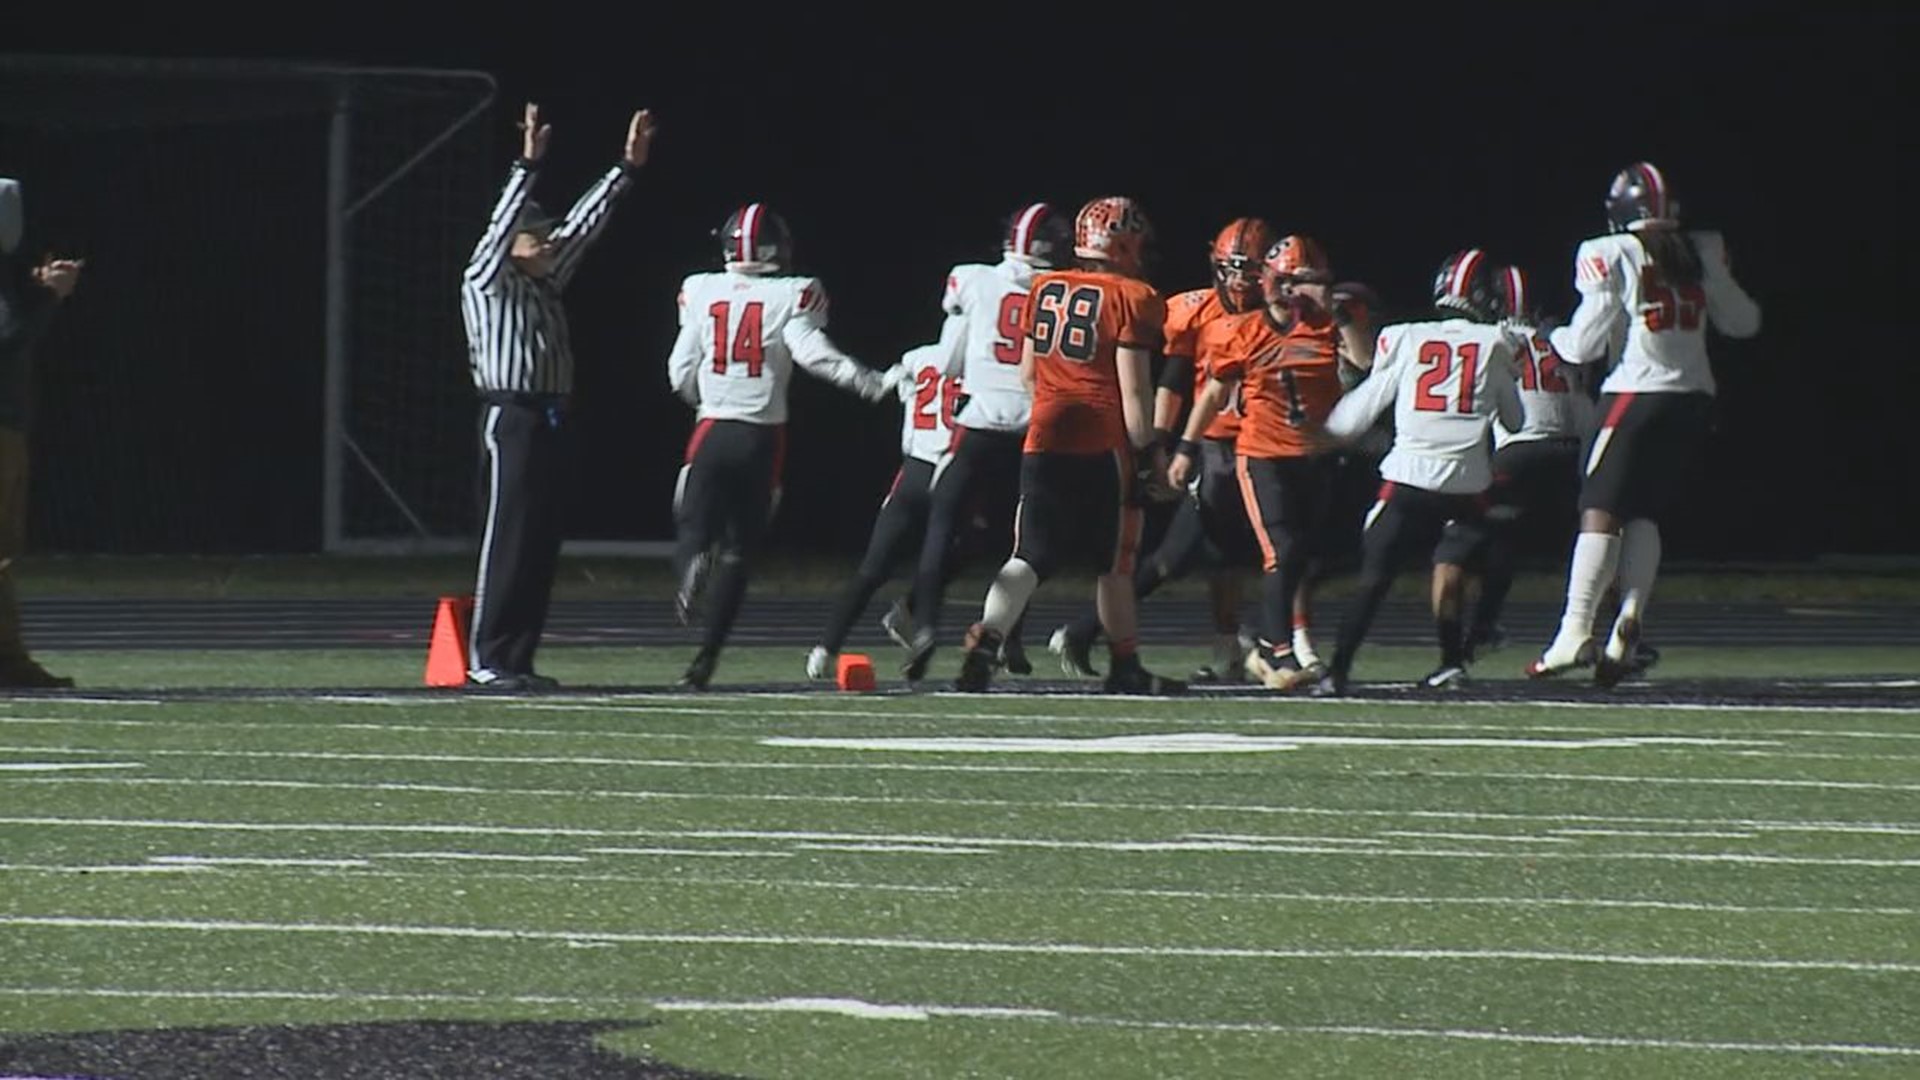 The Bulldogs' Quest to Return to the State Championship Game Ended in the State Semifinals